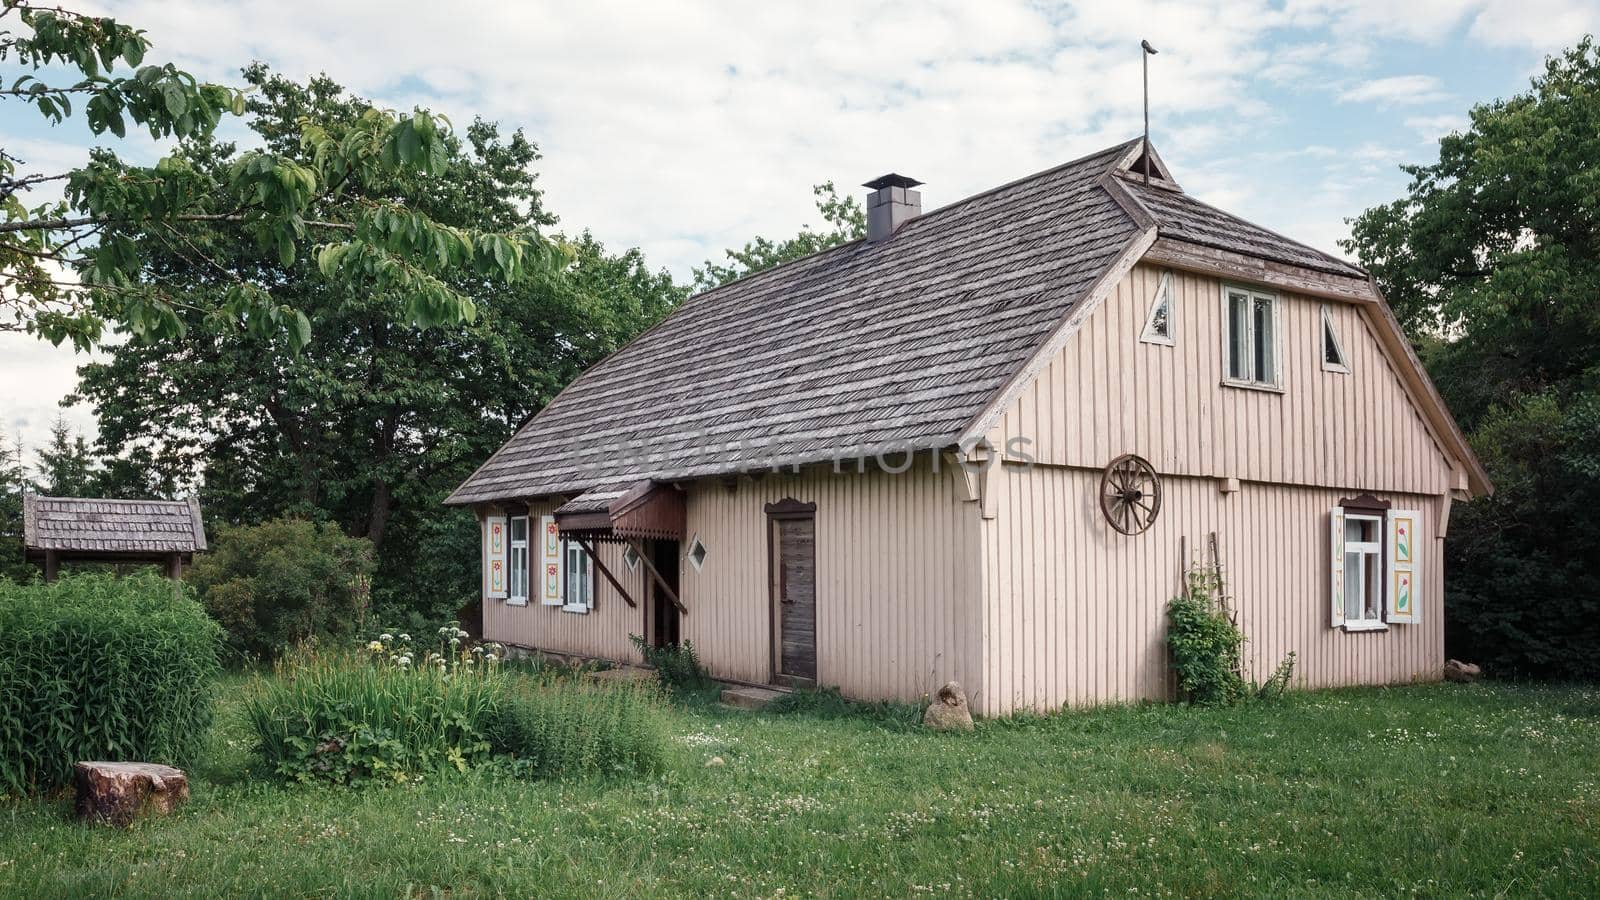 Traditional Lithuanian wooden house in the countryside. Plateliai village, Lithuania.